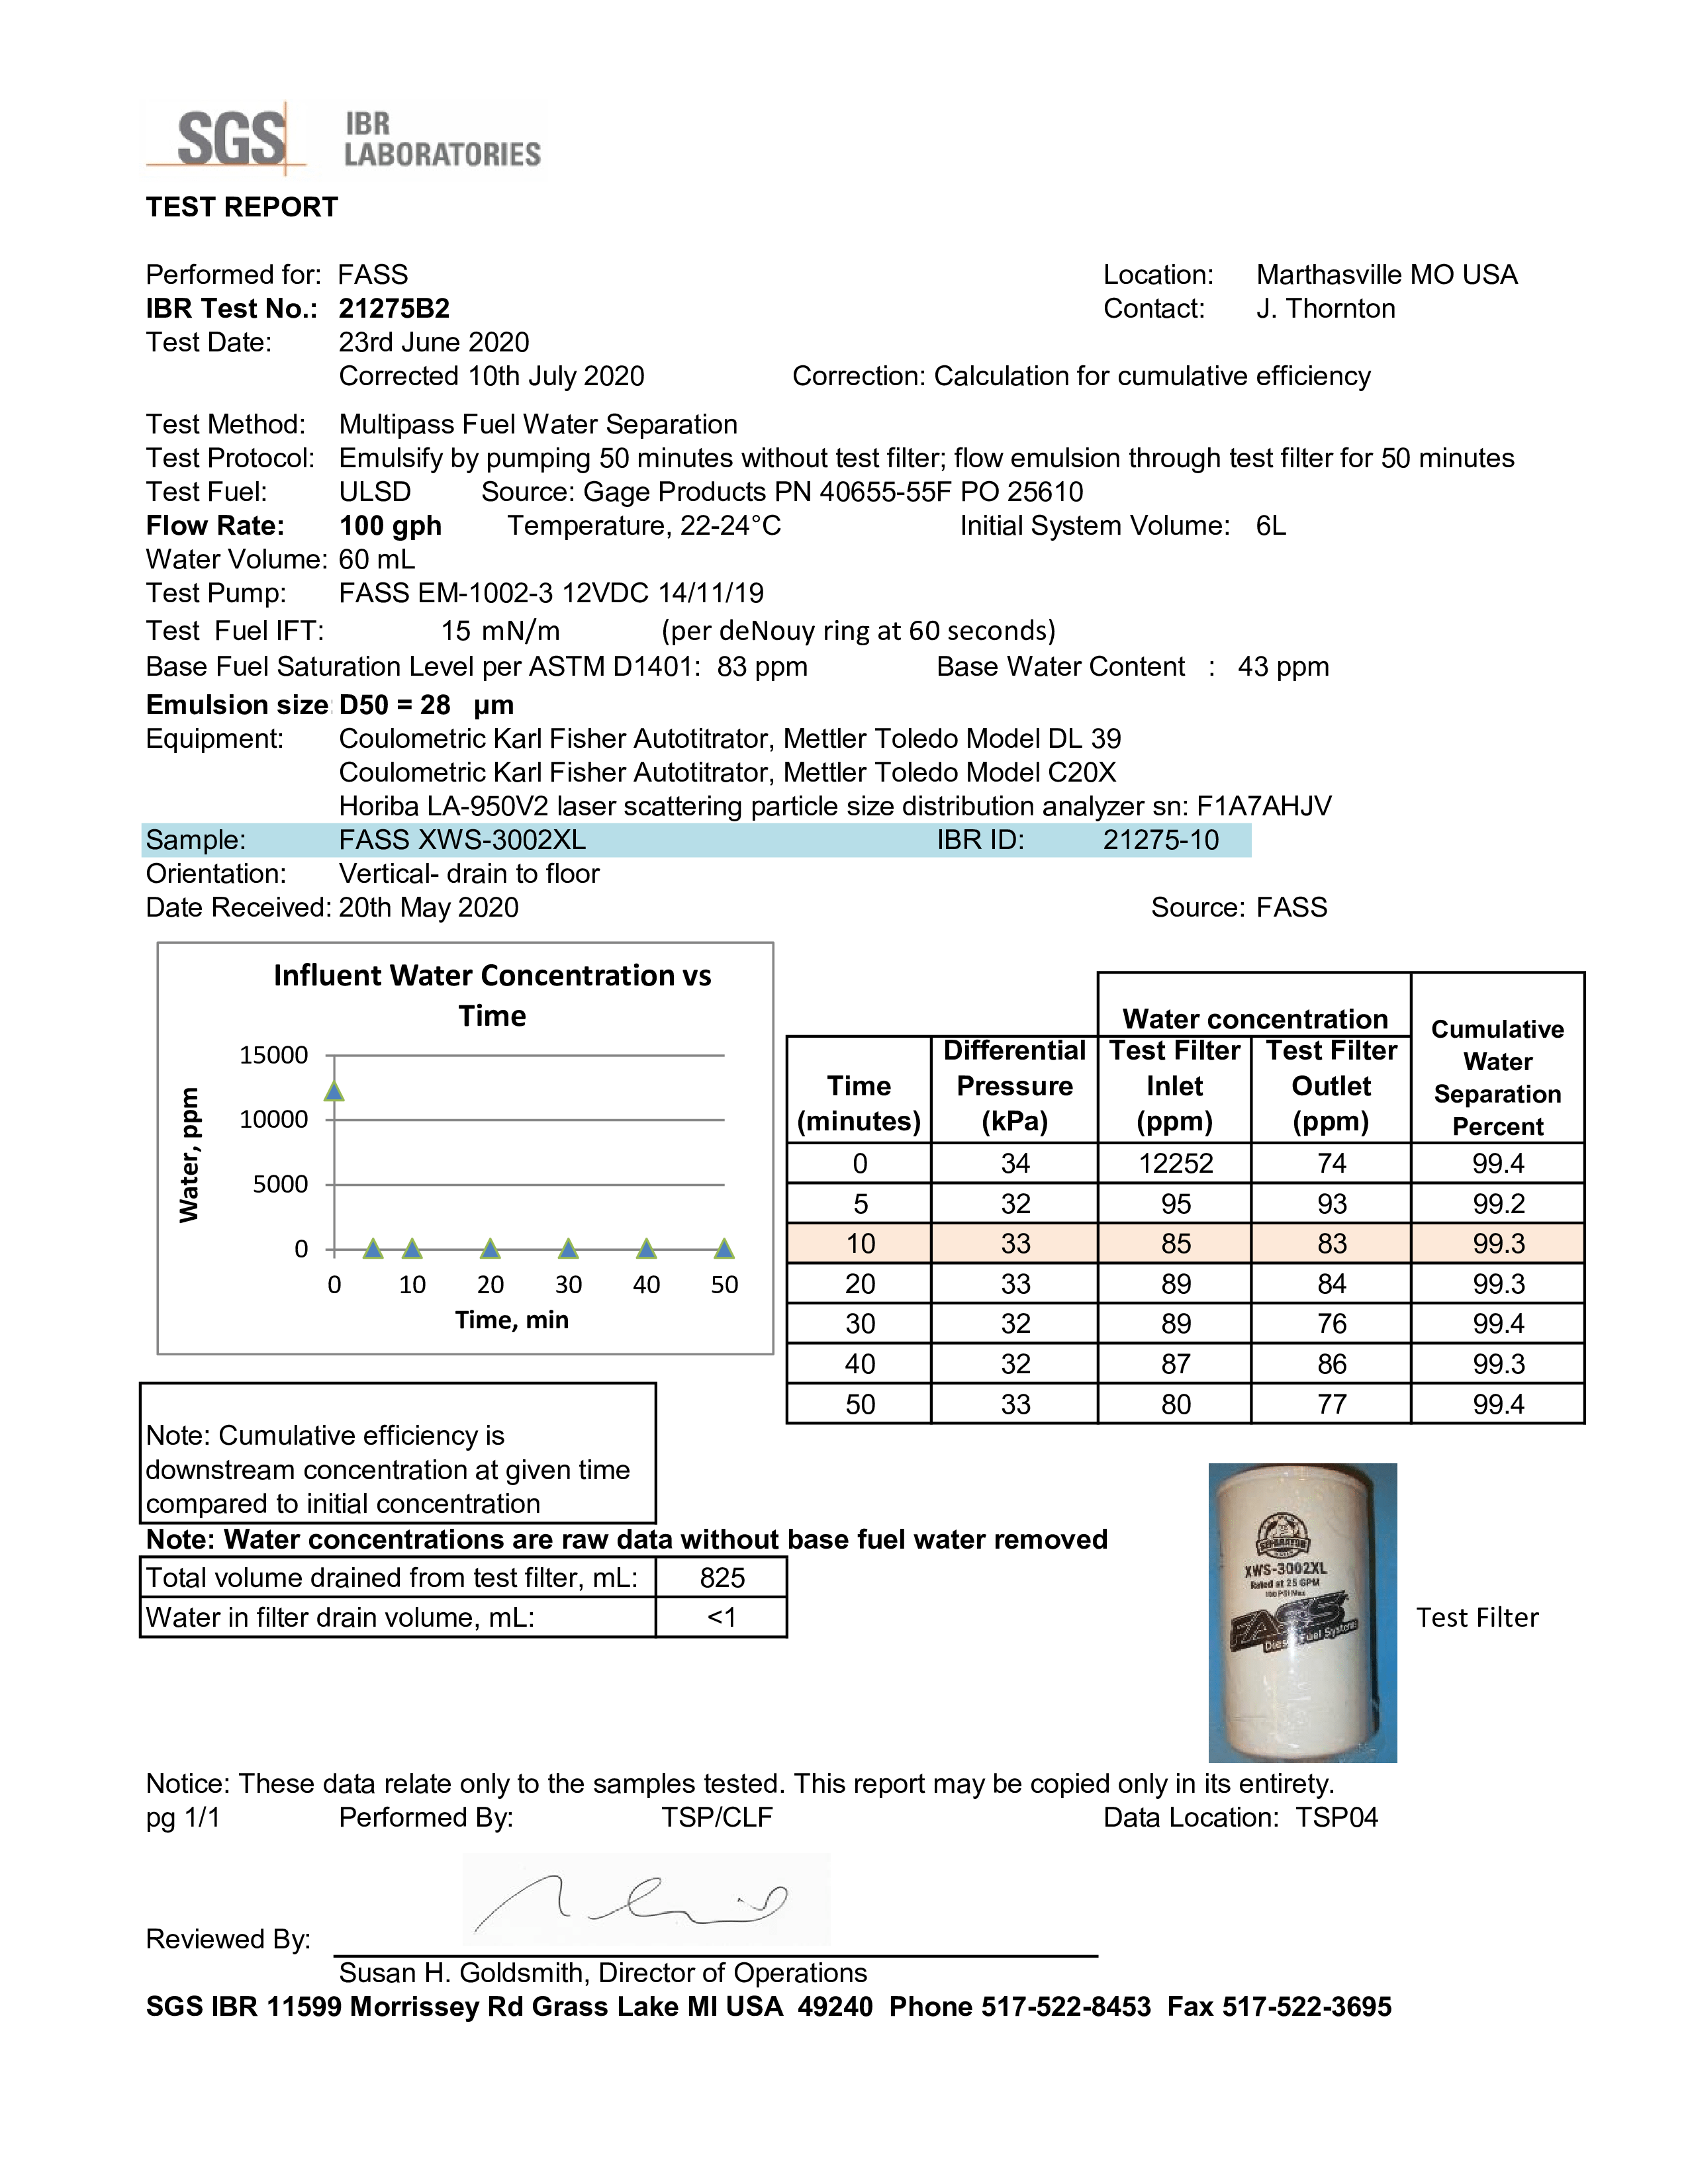 fass fuel filters_xl_test results